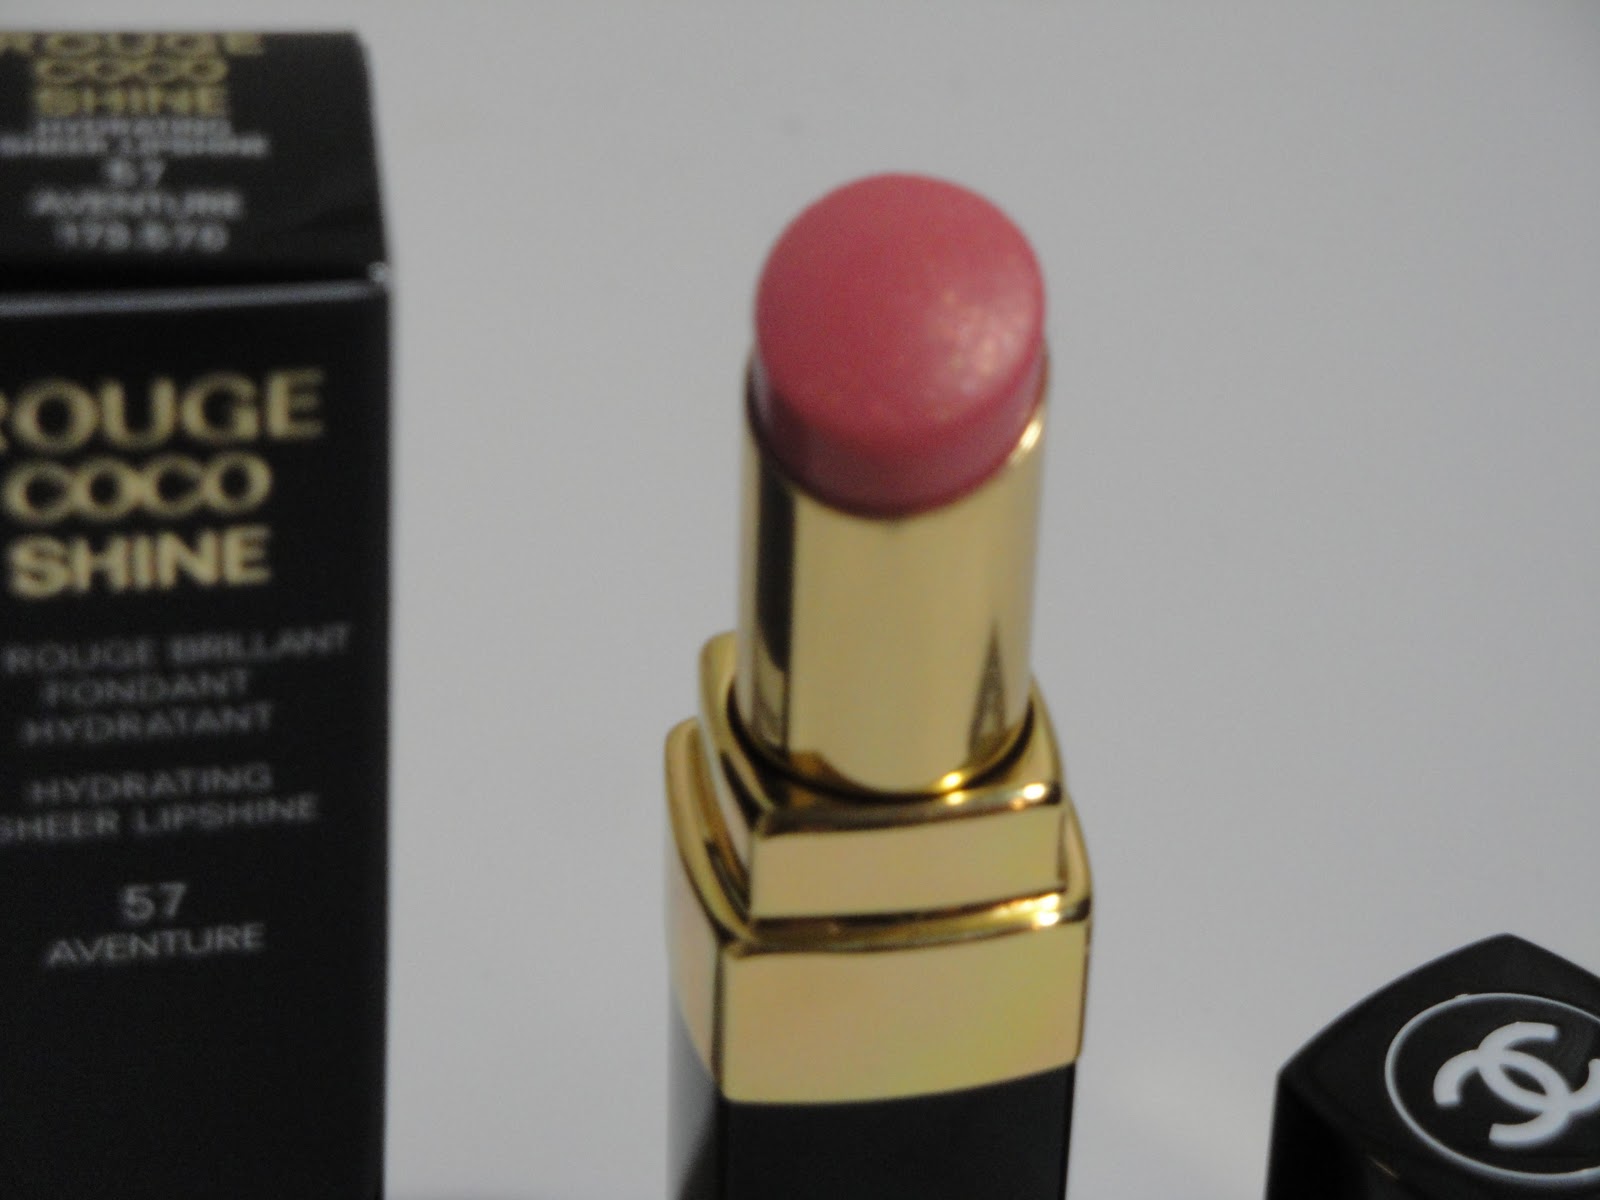 Chanel Rouge Coco Shine Lipstick in Aventure - Review